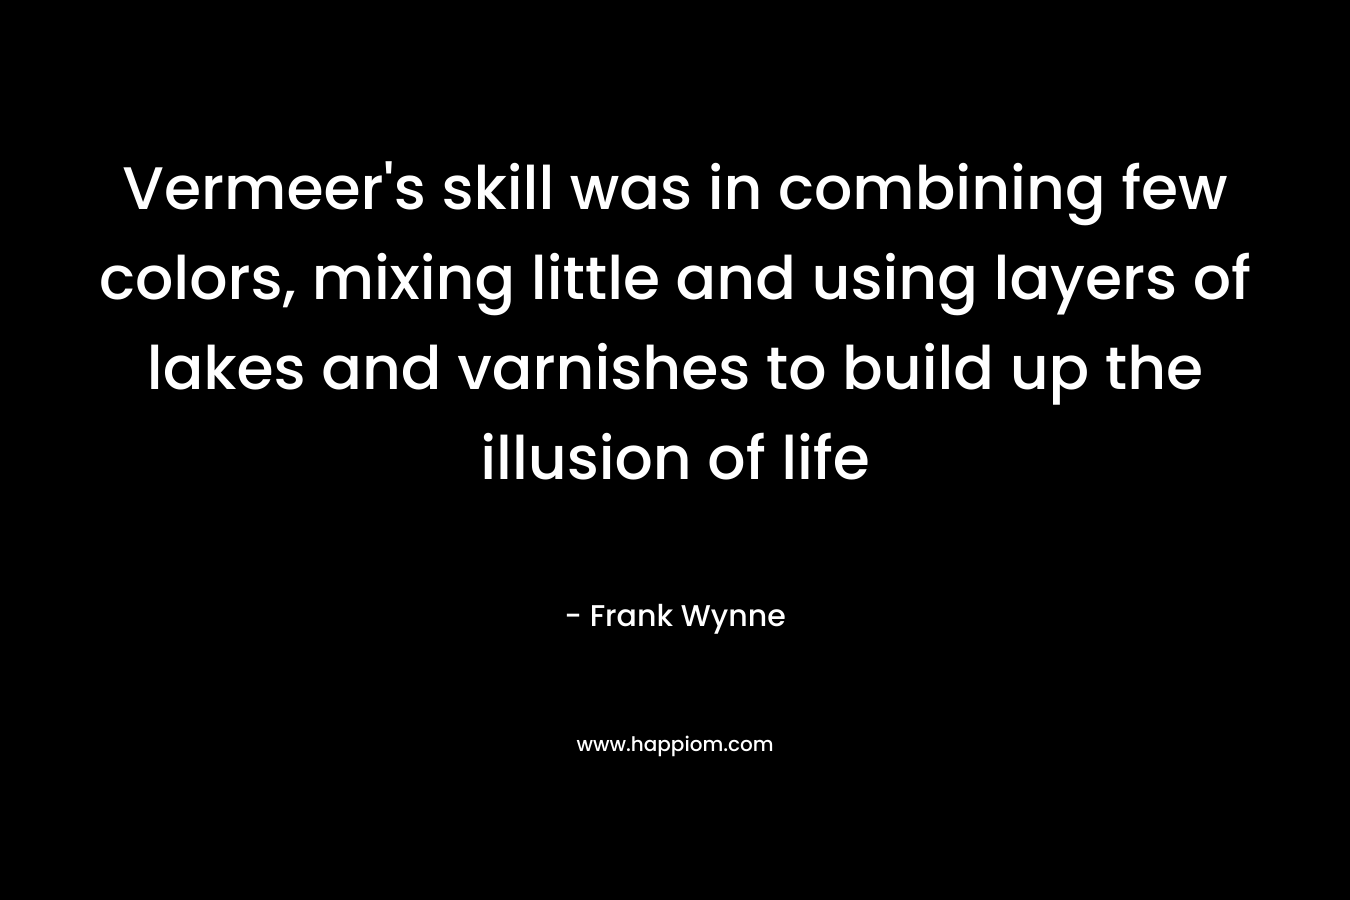 Vermeer’s skill was in combining few colors, mixing little and using layers of lakes and varnishes to build up the illusion of life – Frank Wynne